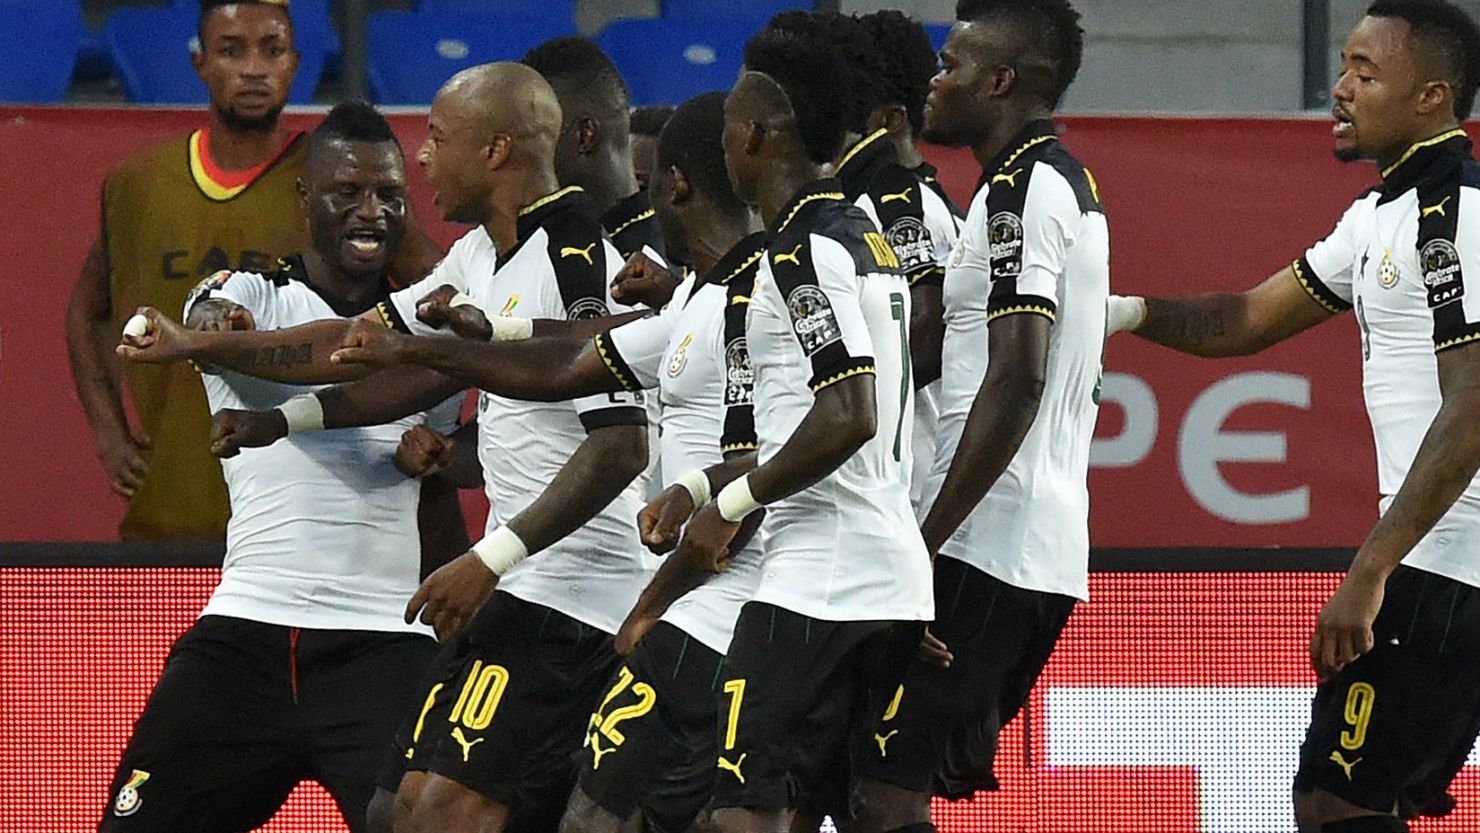 The Ghana players celebrate as goals from Jordan and Andre Ayew take them into the semifinals of the Africa Cup of Nations with a 2-1 win over DR Congo in Oyem.